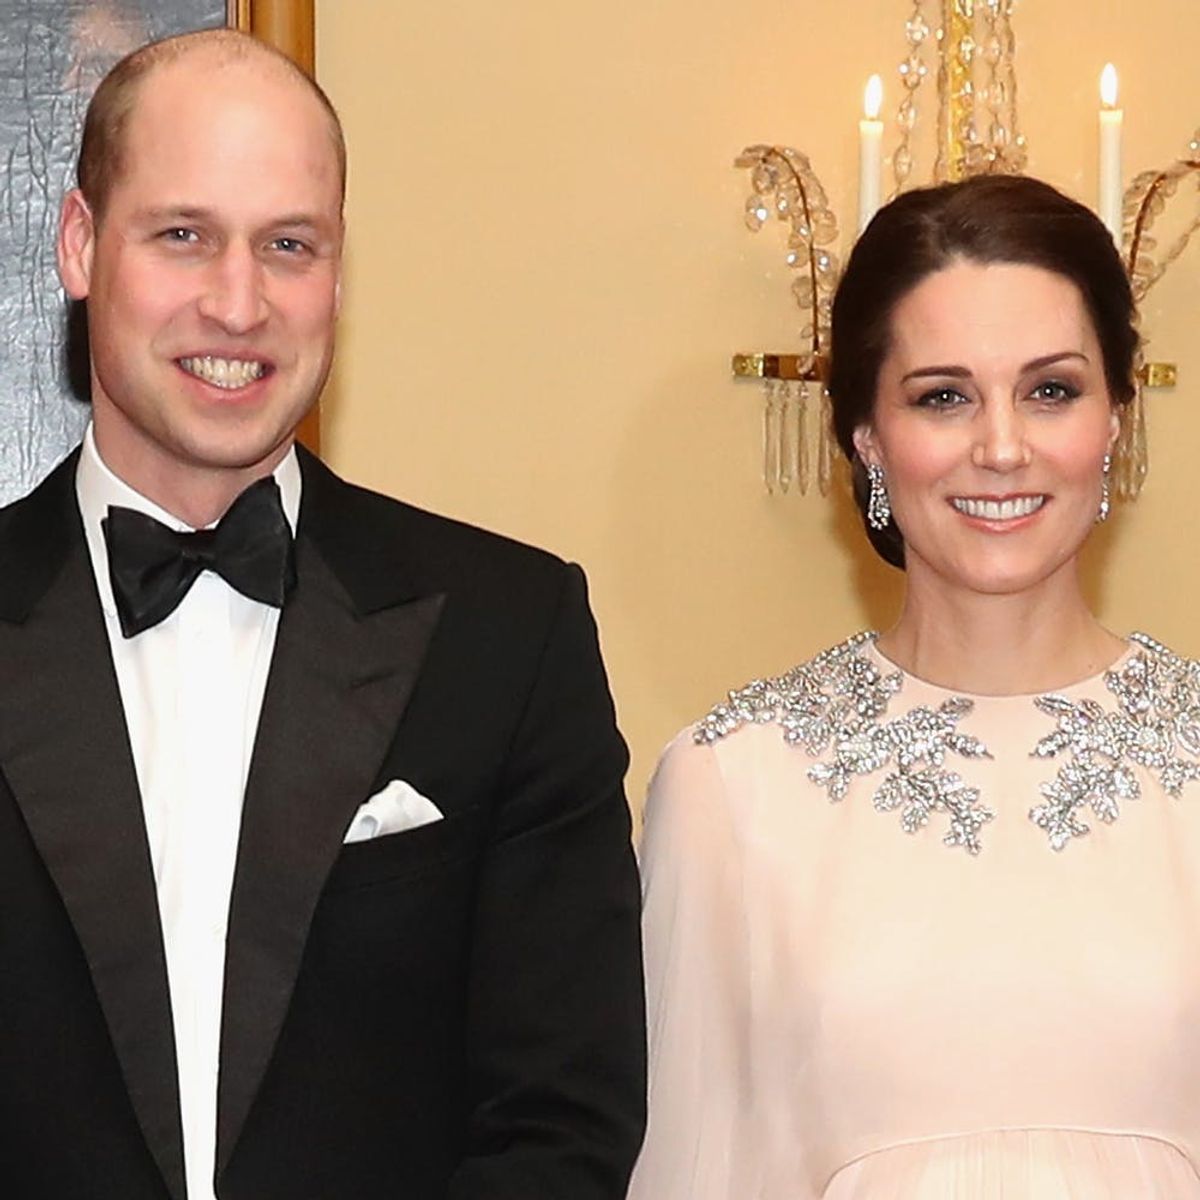 Duchess Kate Middleton Gives Birth, Welcomes Royal Baby #3 With Prince William!